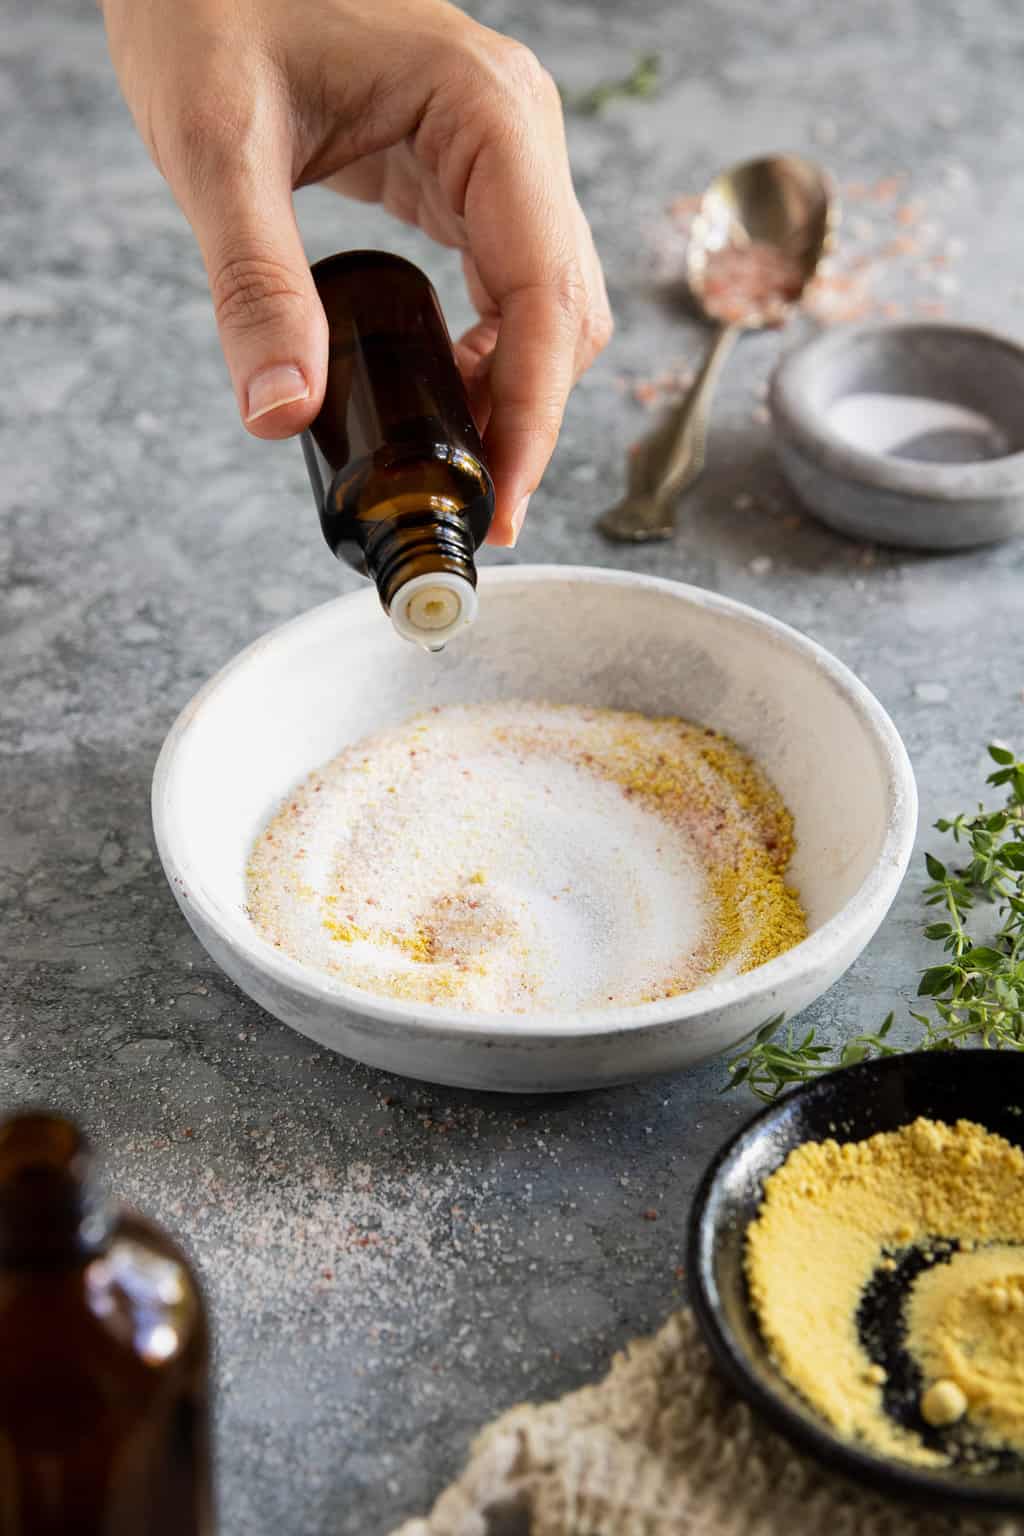 How to add essential oils to a mustard bath